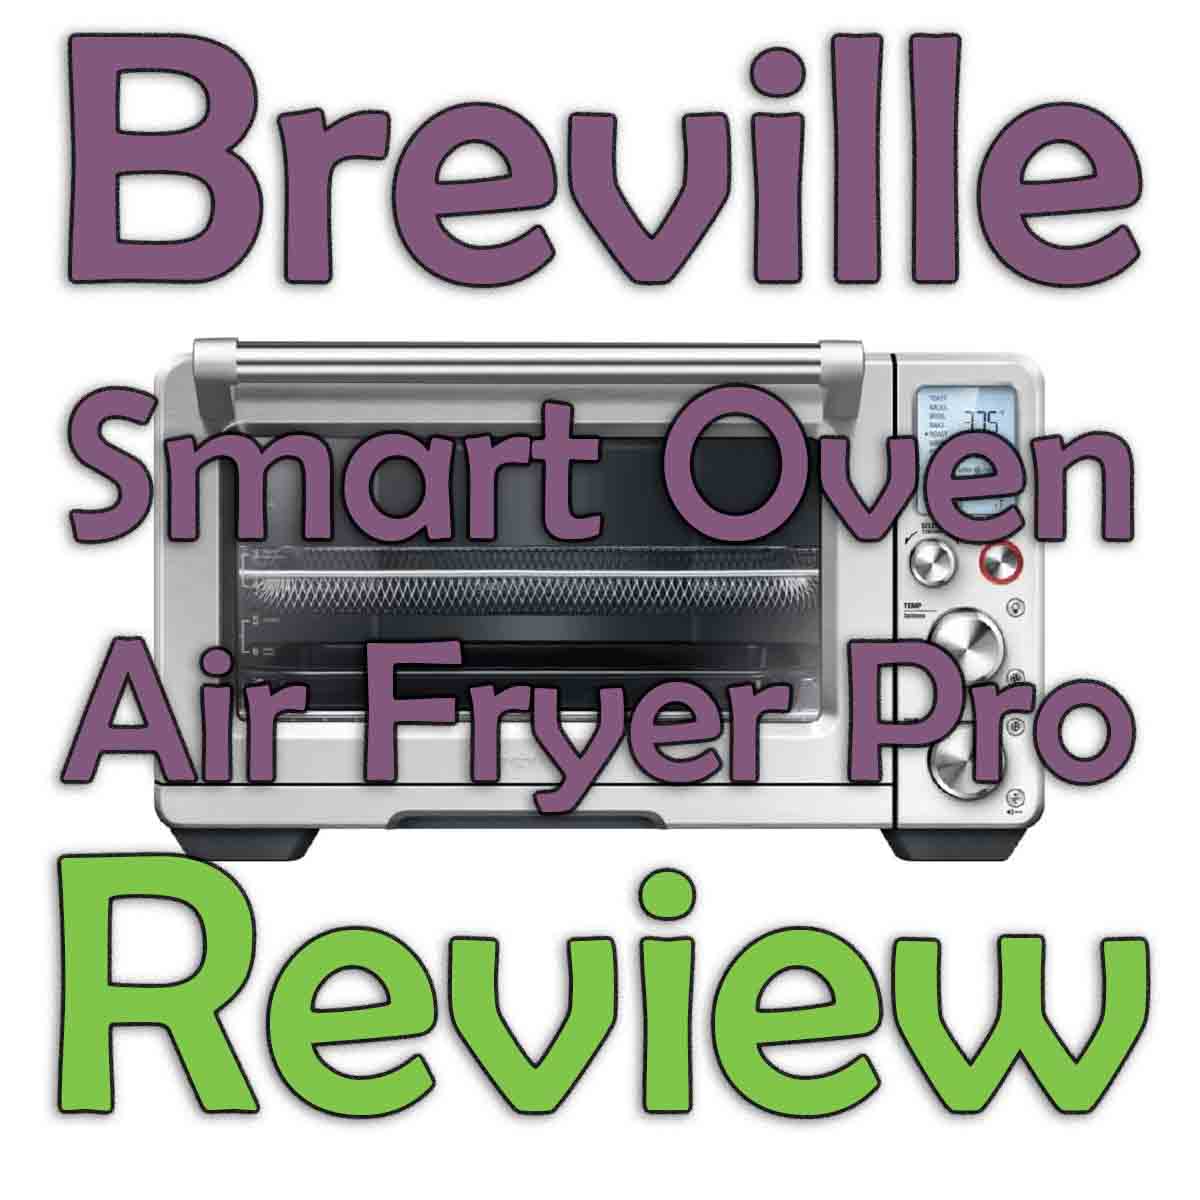 Breville Smart Oven Air Fryer Pro Review » LeelaLicious